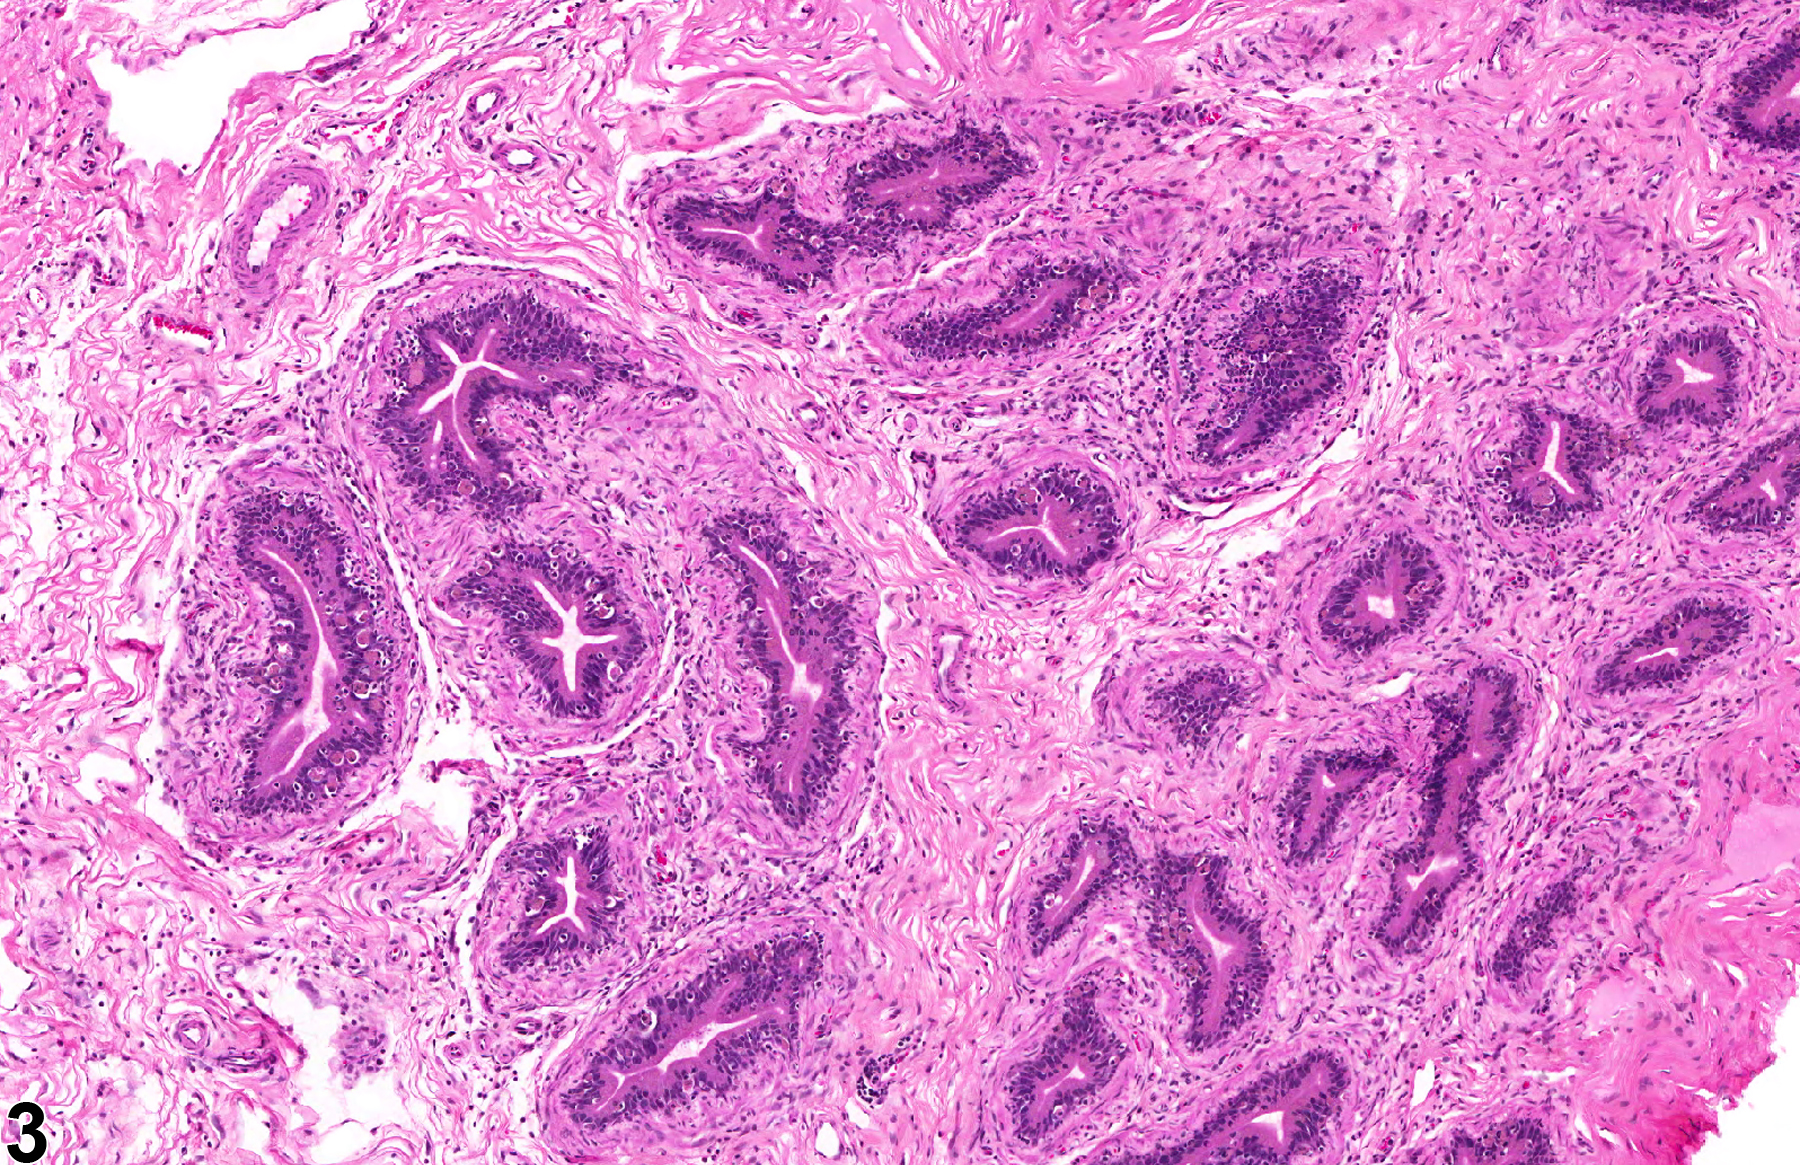 Image of duct atrophy in the epididymis from a male F344/N rat in a chronic study